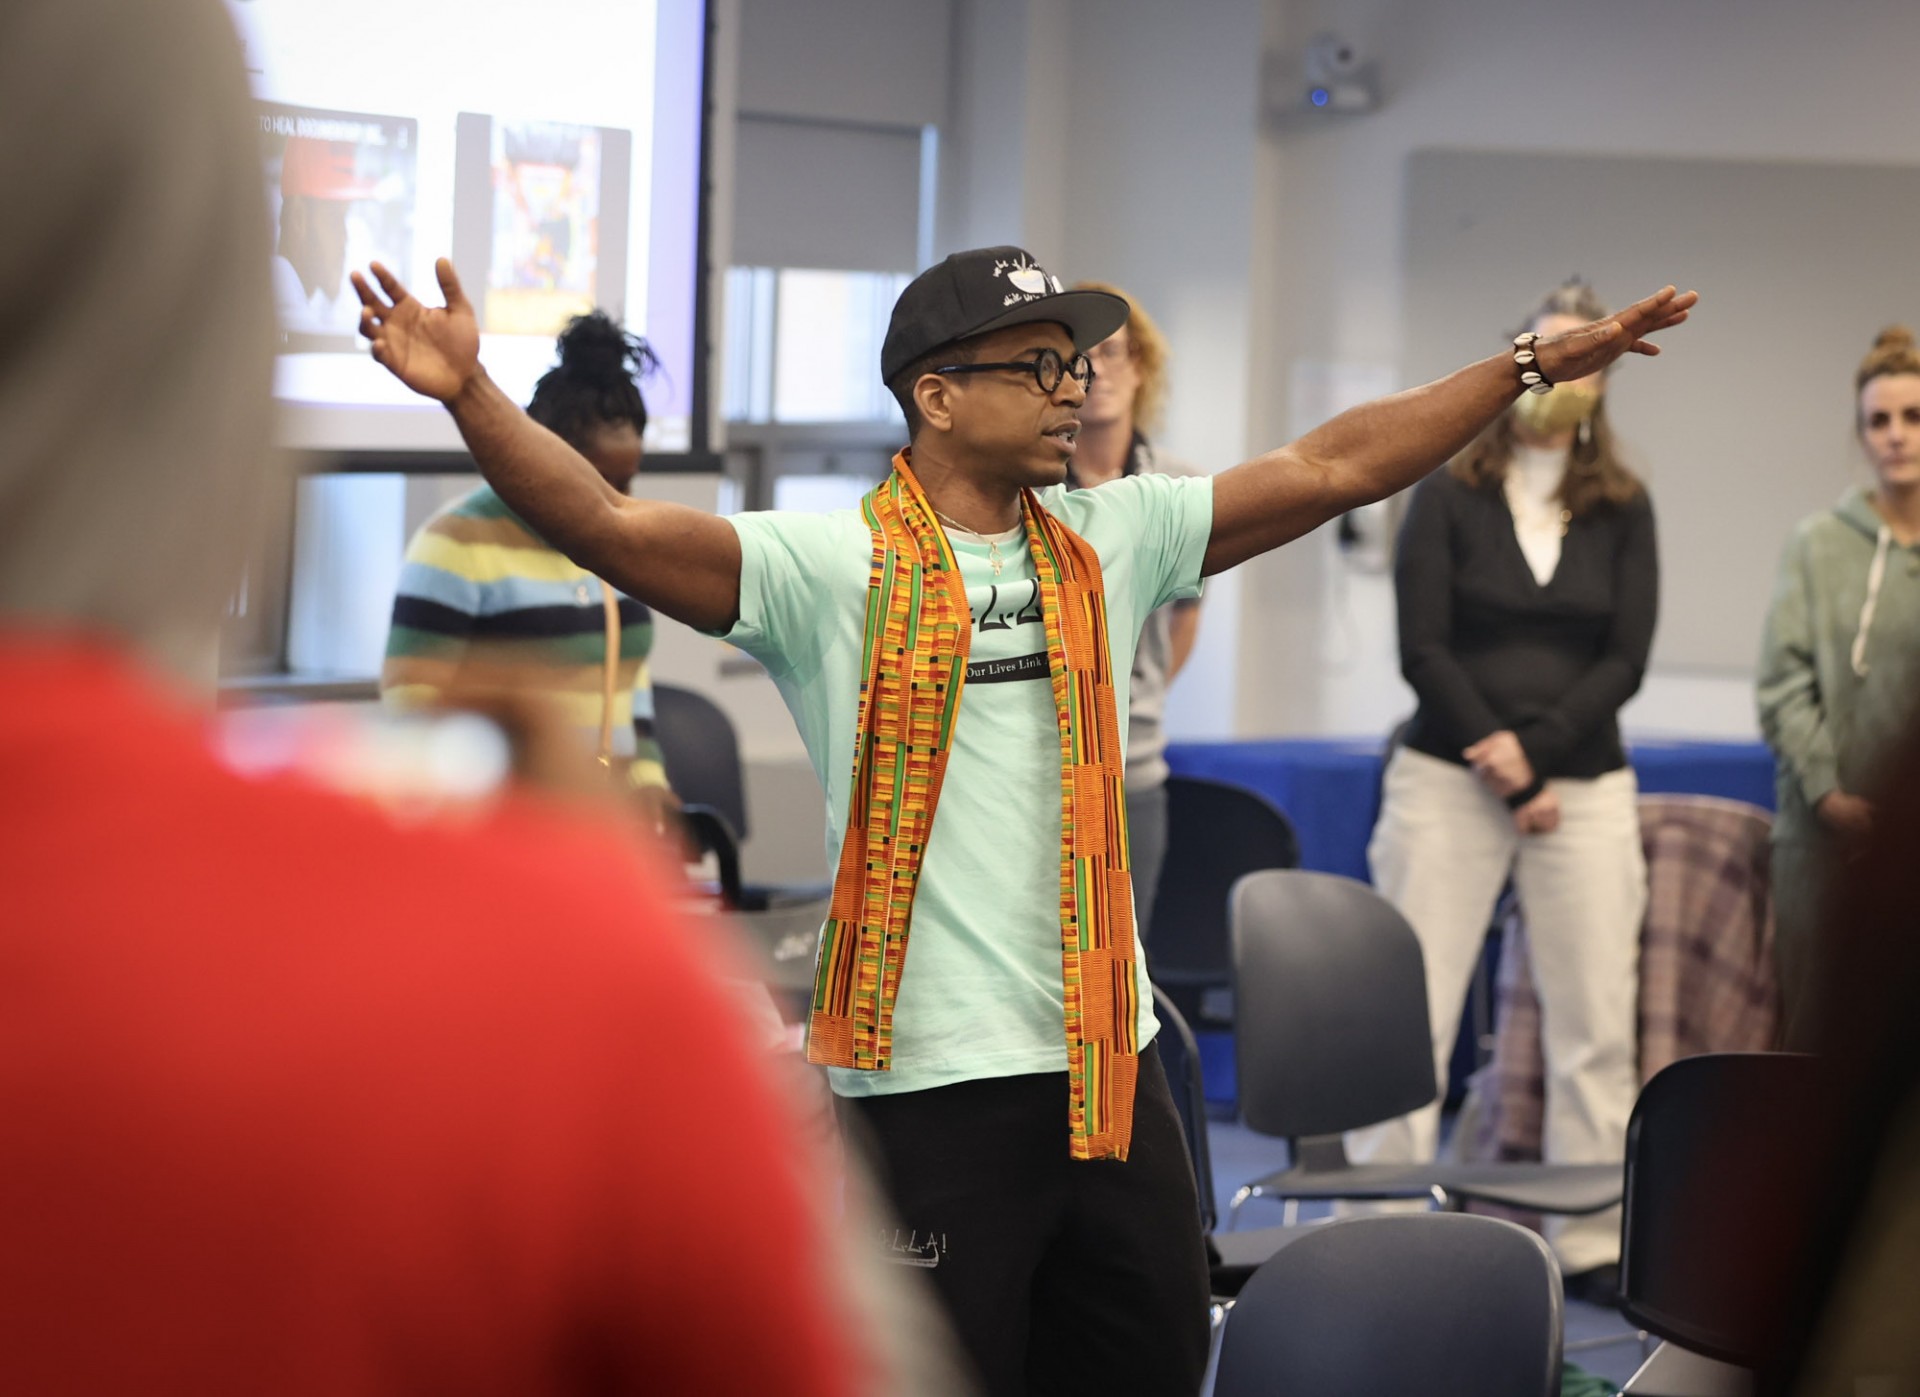 A Black man with a colorful scarf on standing in the middle of a circle of people with his arms lifted